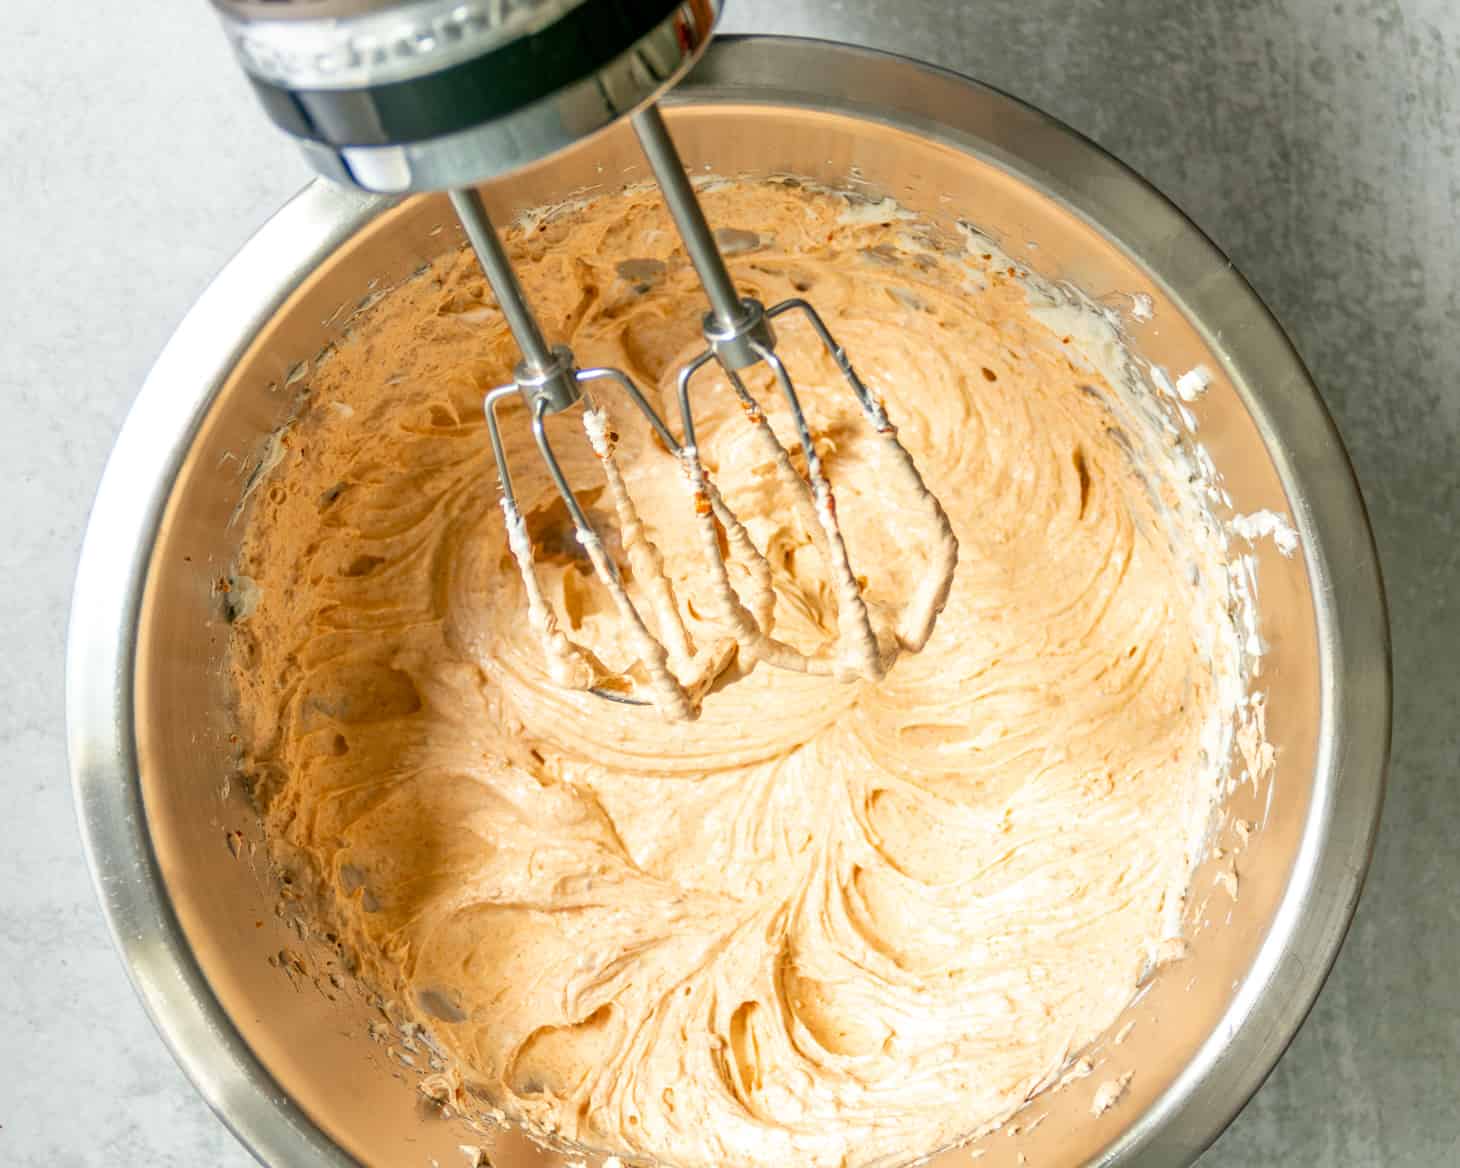 Use an electric hand mixer to combine cream cheese, sour cream, and taco mix.